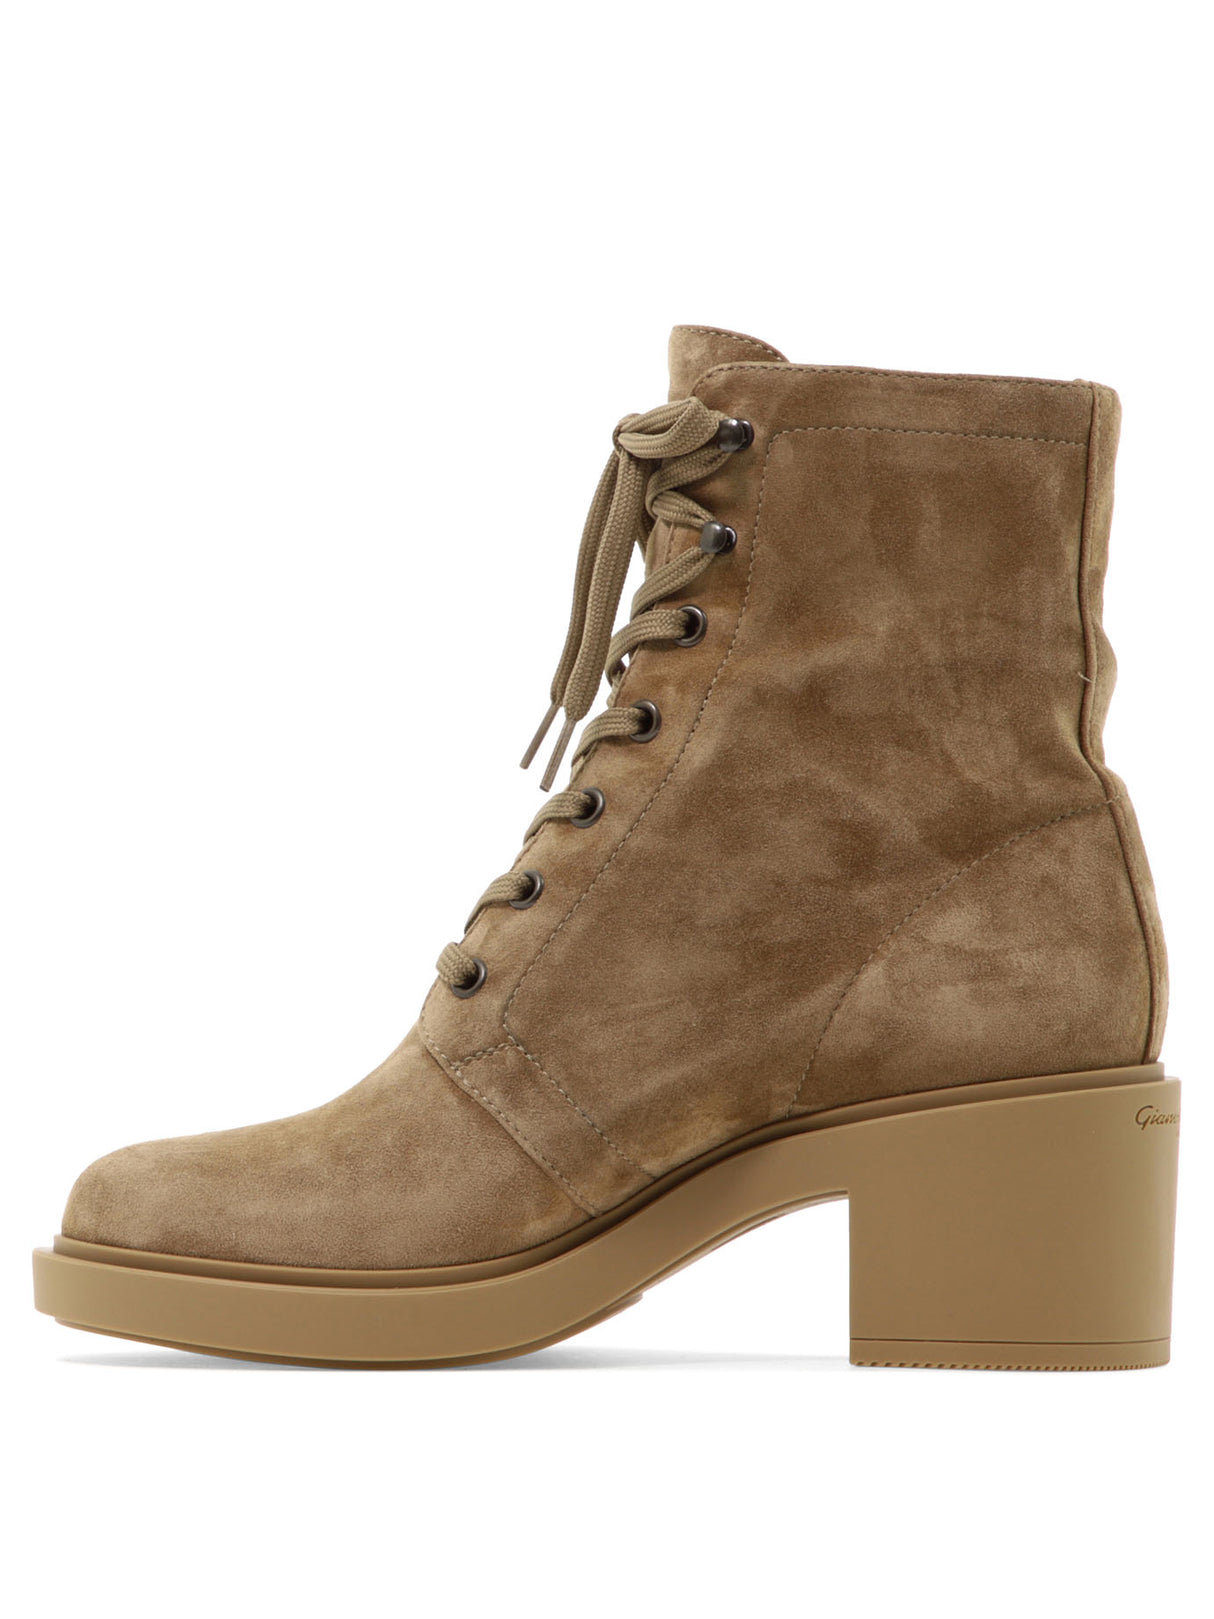 GIANVITO ROSSI Leather Lace-Up Boots for Women in Beige - FW23 Collection